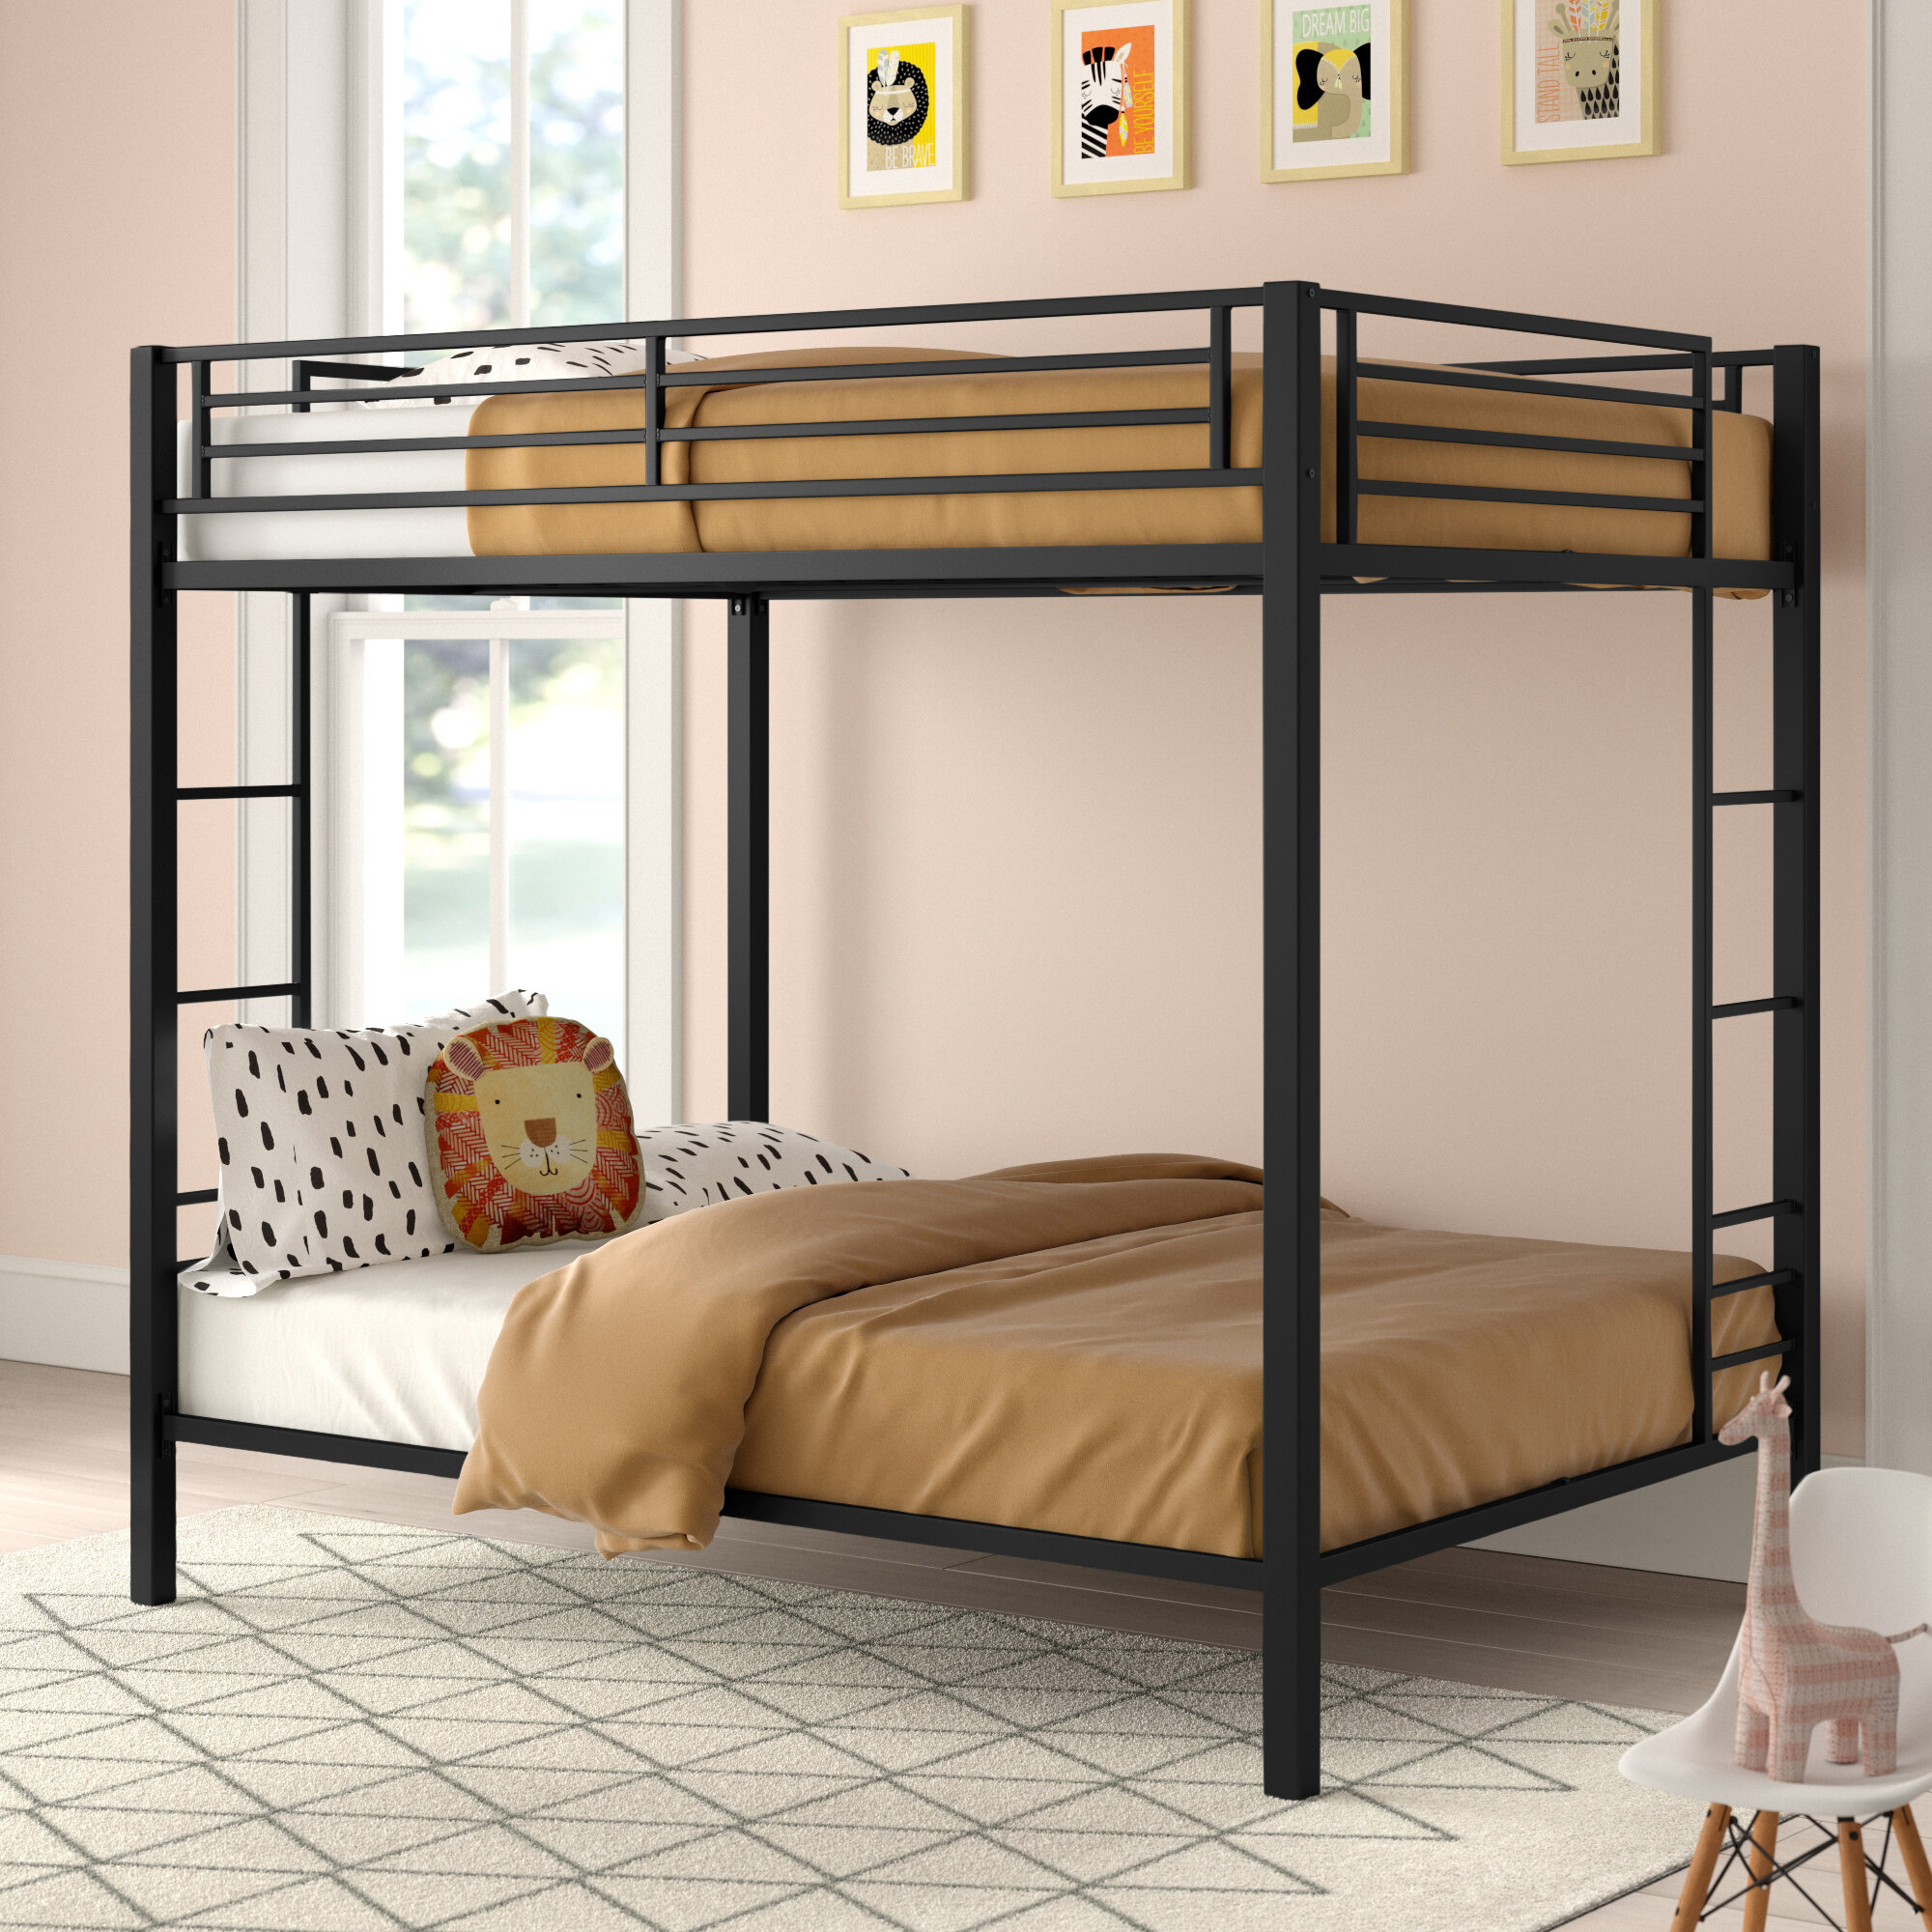 MODERN BEDROOM KIDS YOUTH BOY OR GIRL DOUBLE TRIPLE BUNK BED STORAGE MATTRESSES 